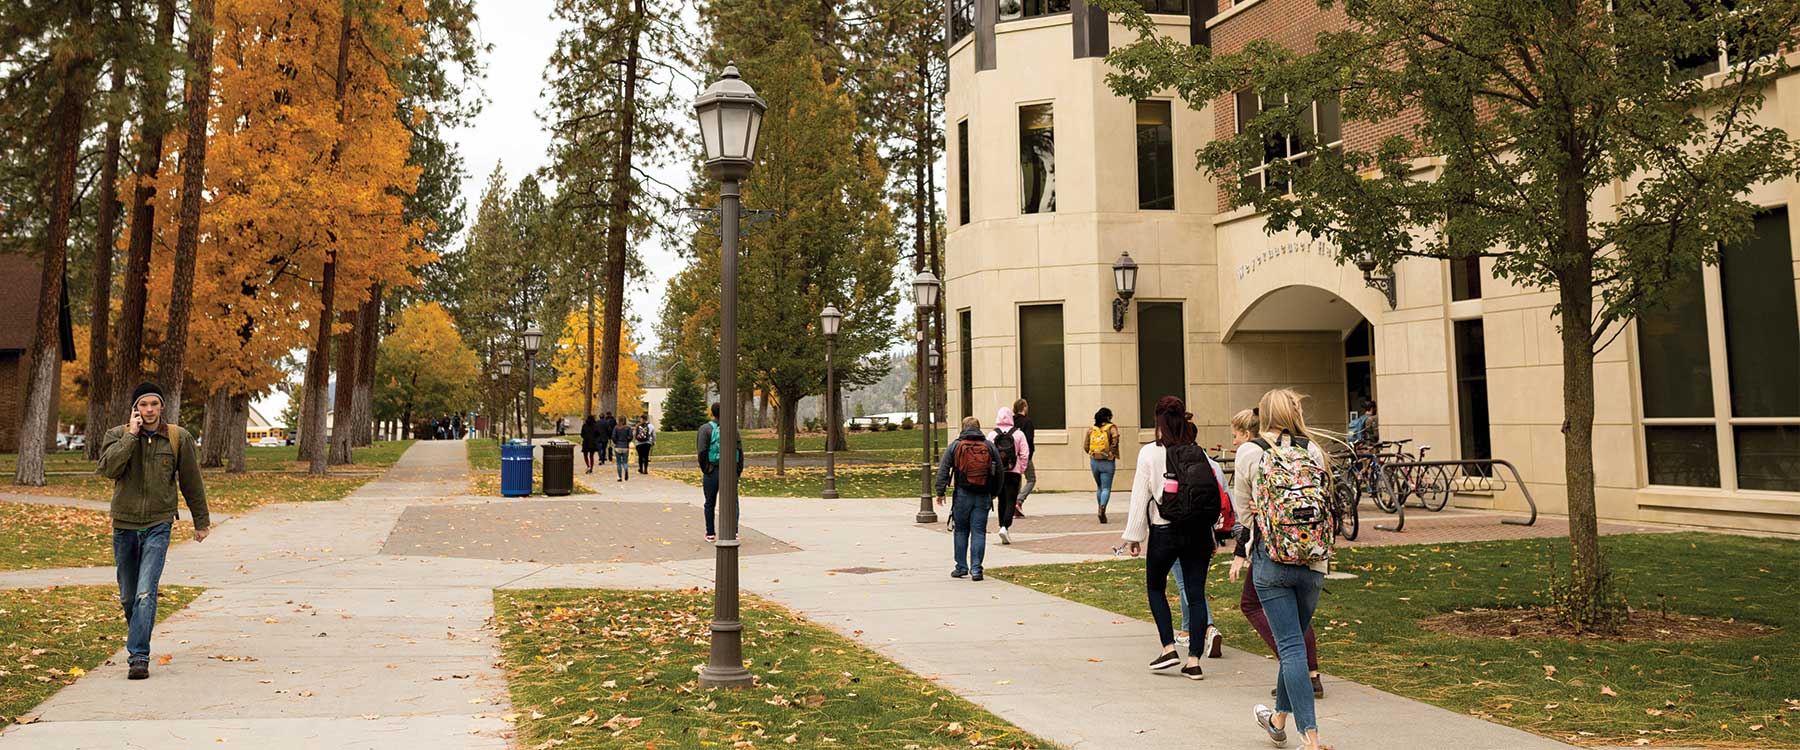 Students walk together down the hello path in the middle of campus on a fall day.